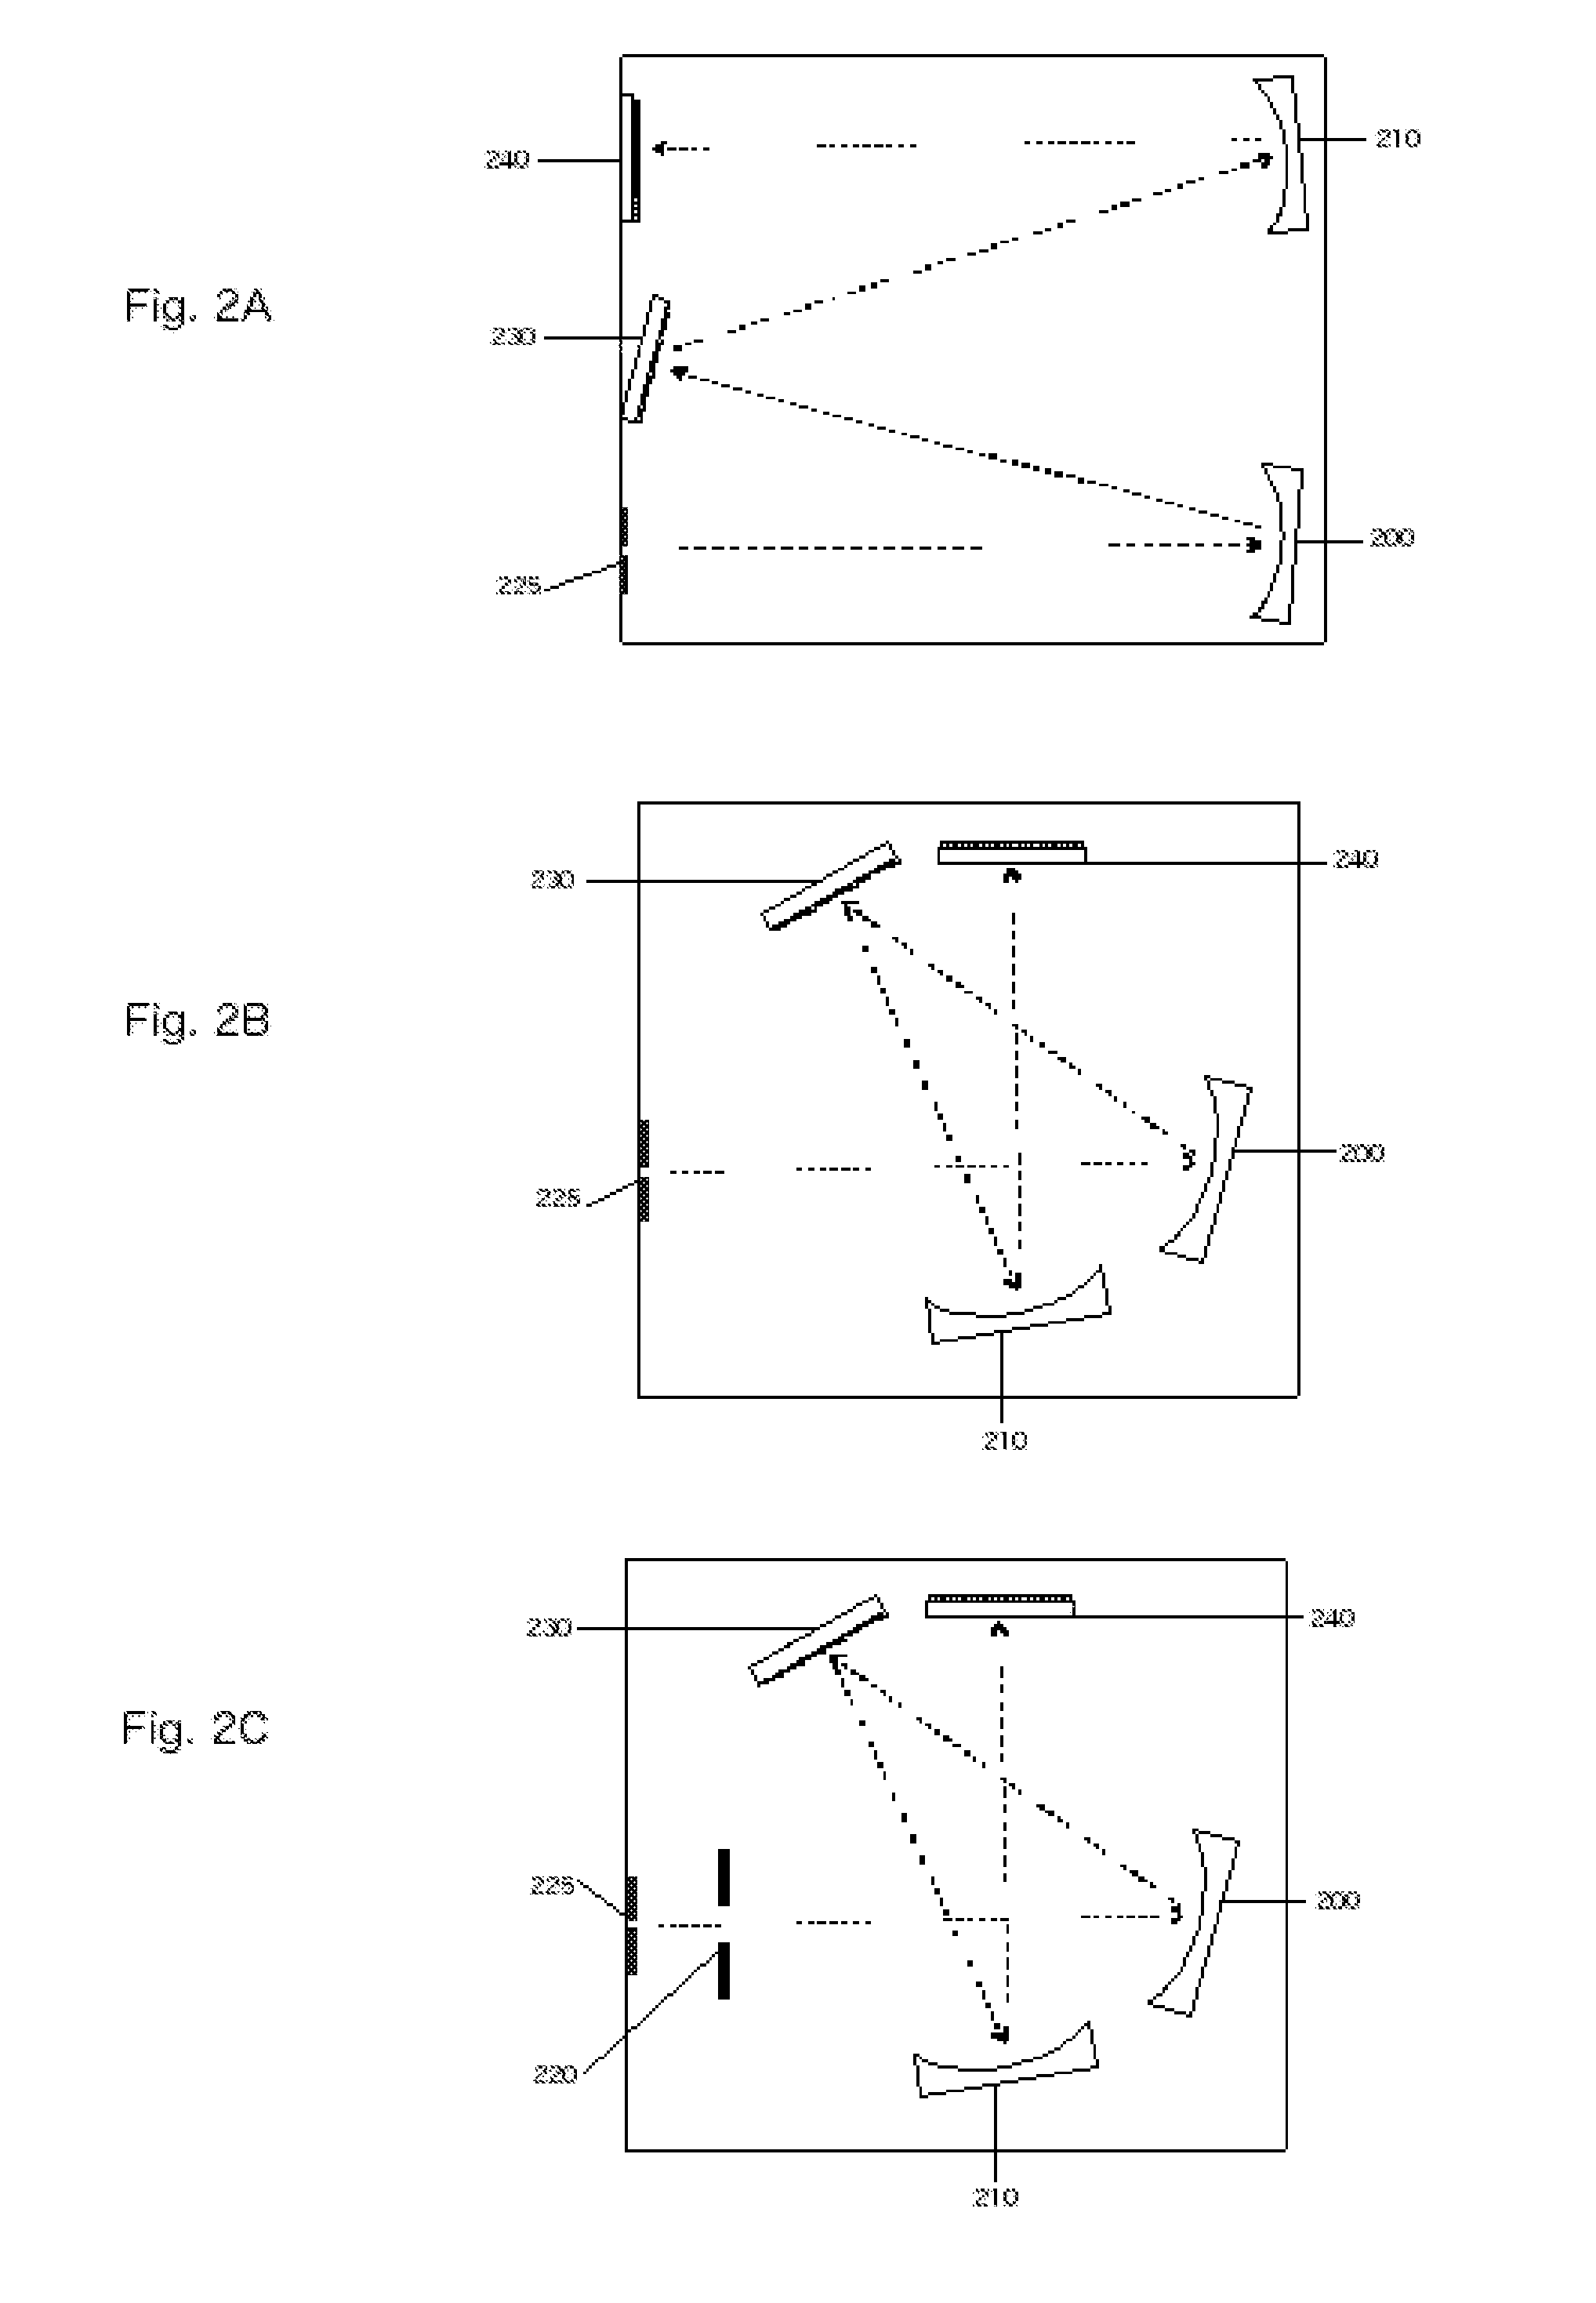 Optical analyzer for identification of materials using reflectance spectroscopy